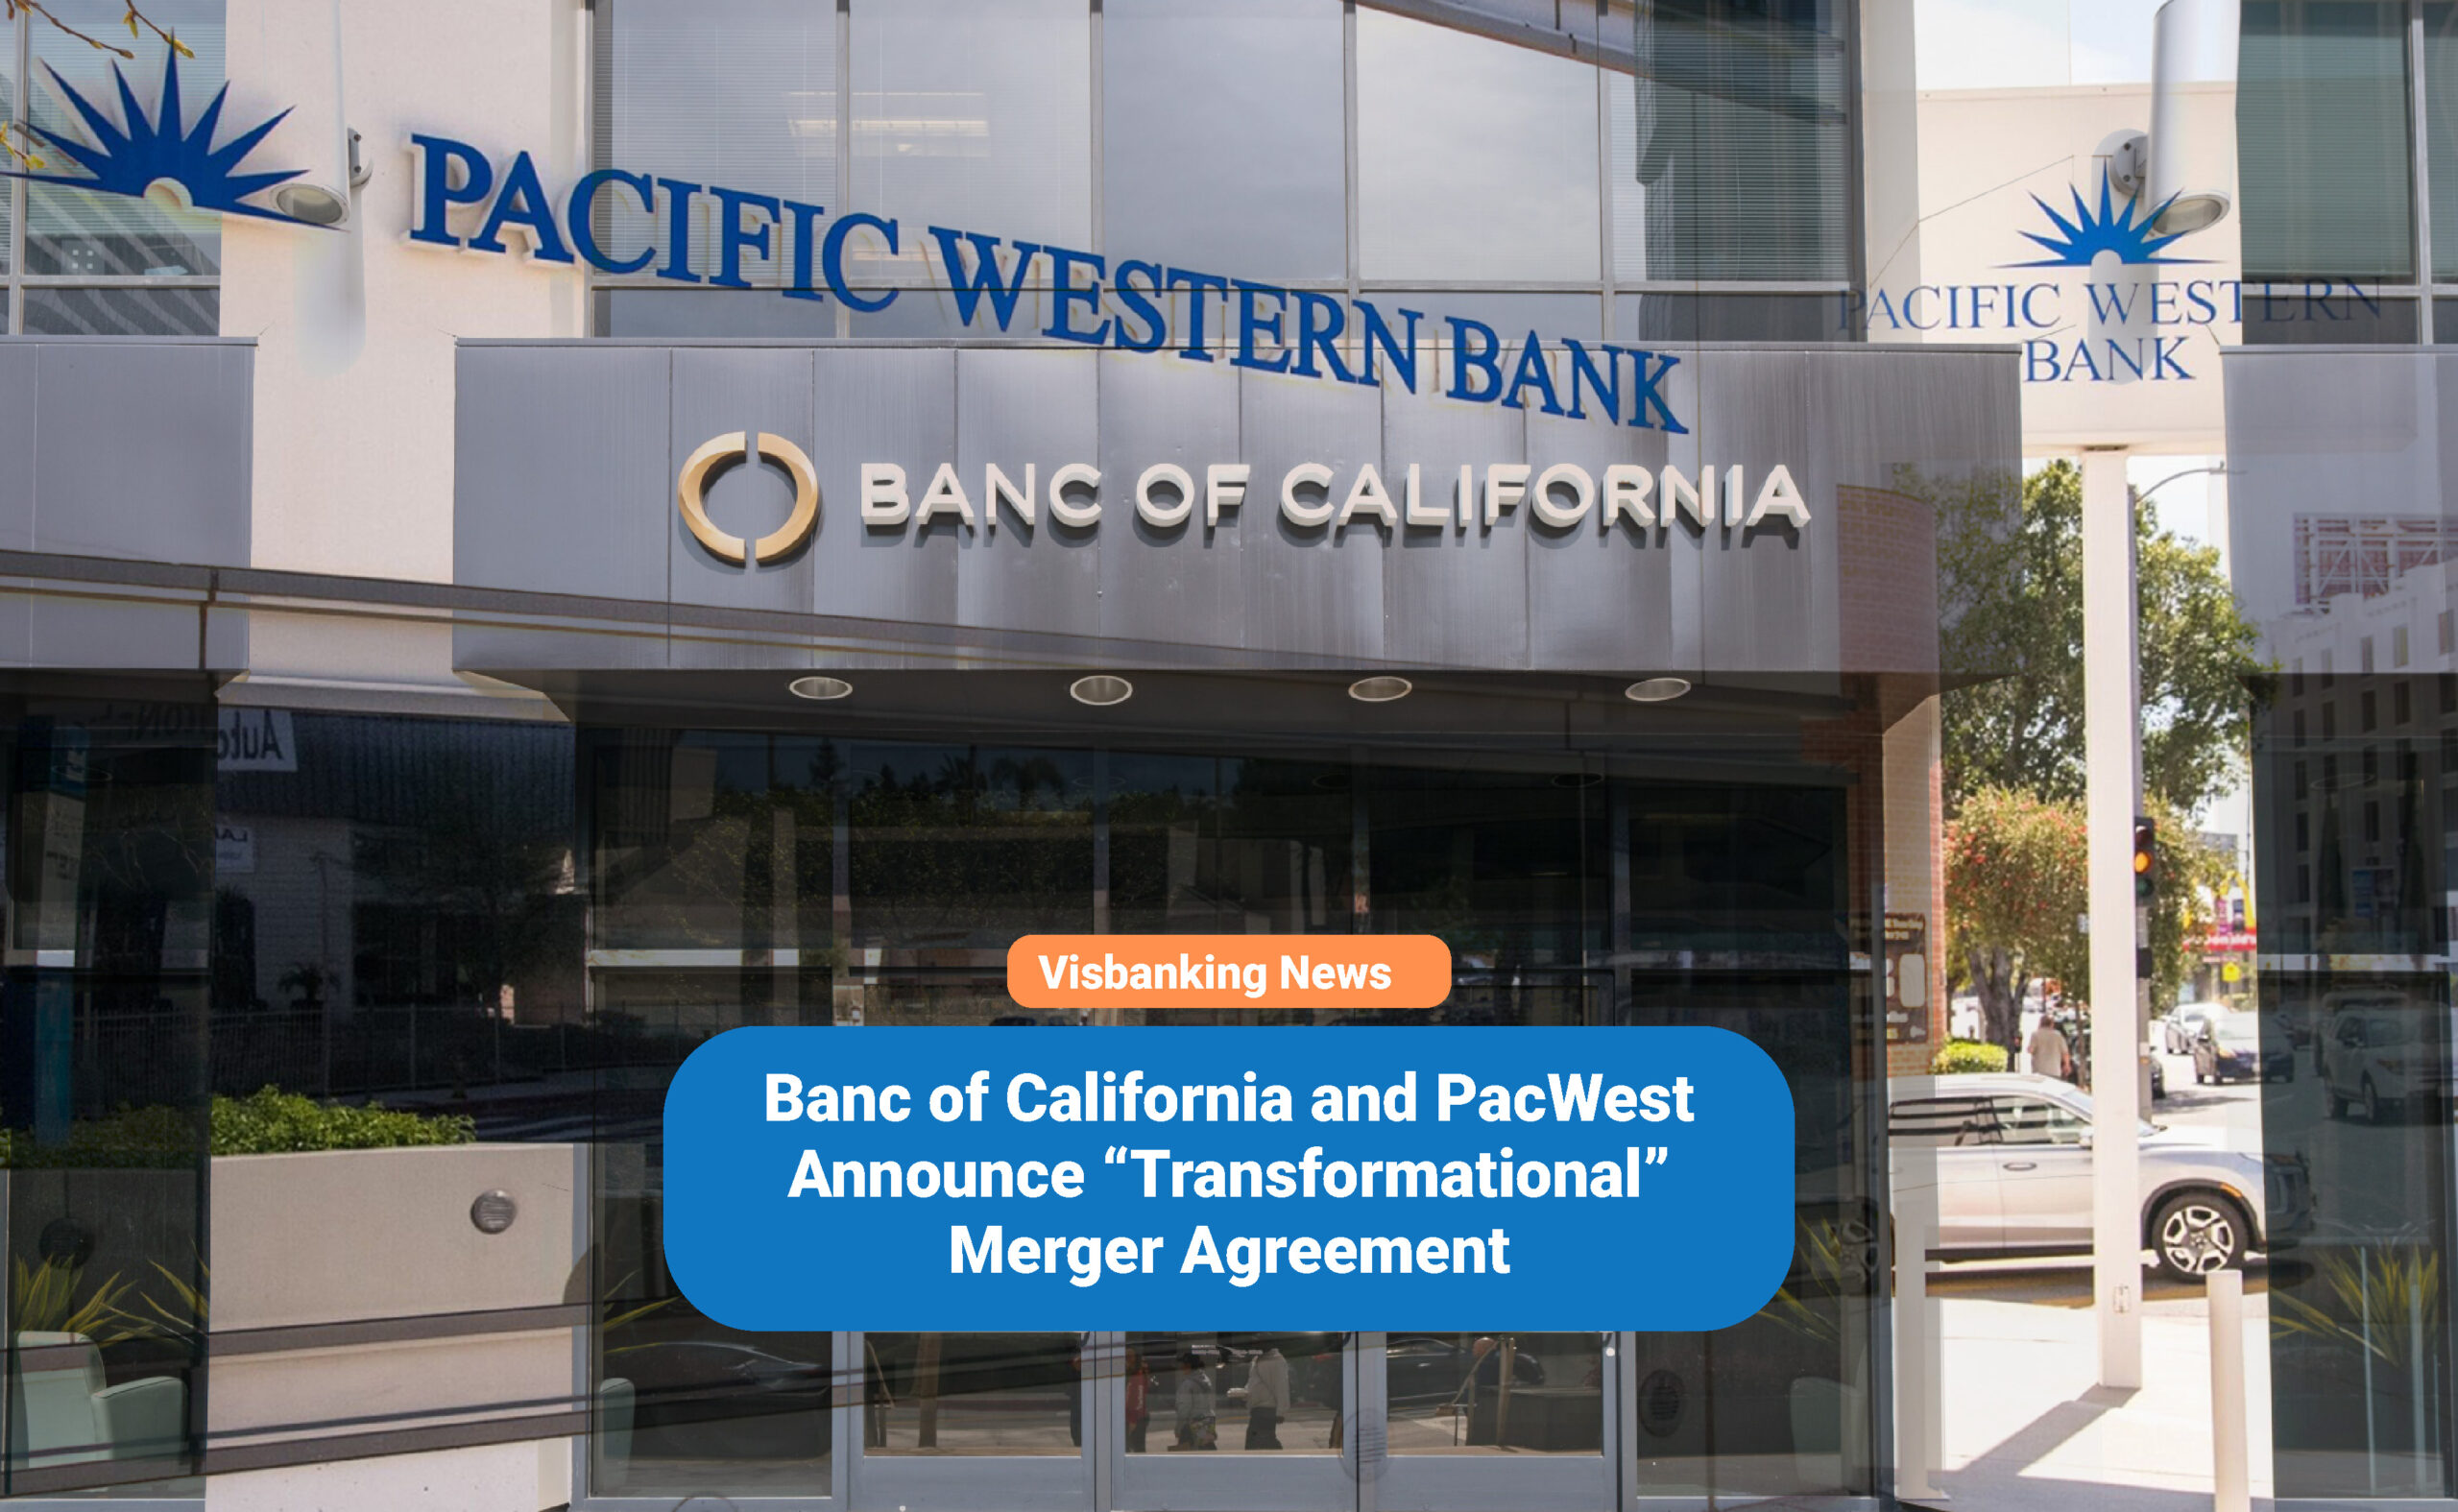 Banc of California and PacWest Announce “Transformational” Merger Agreement